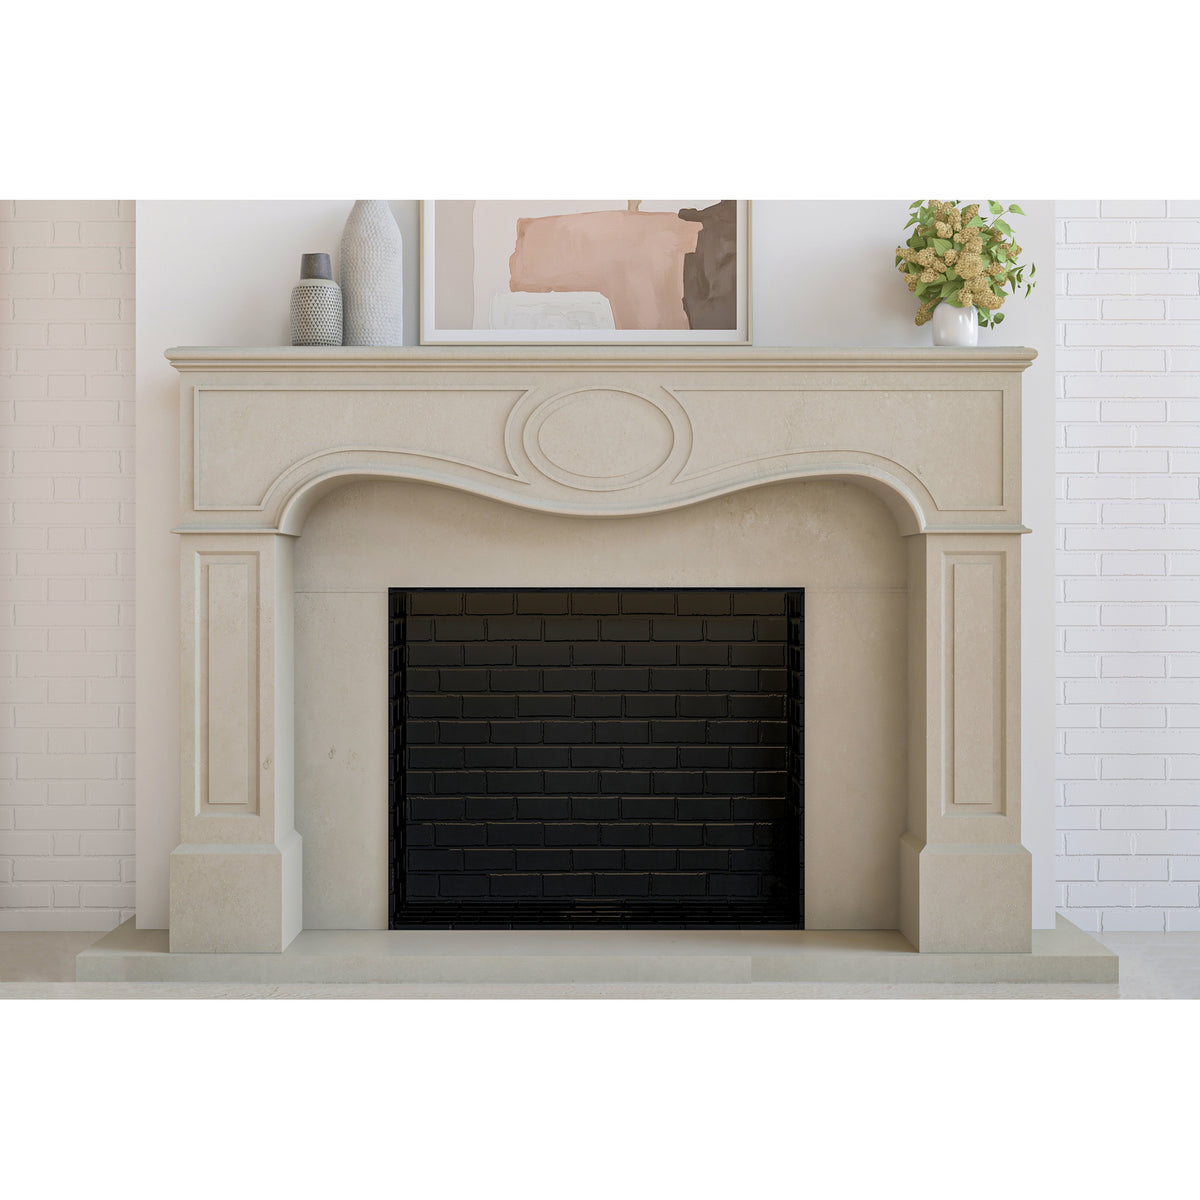 Parlor shown in Cream Limestone. Main Product Slider View